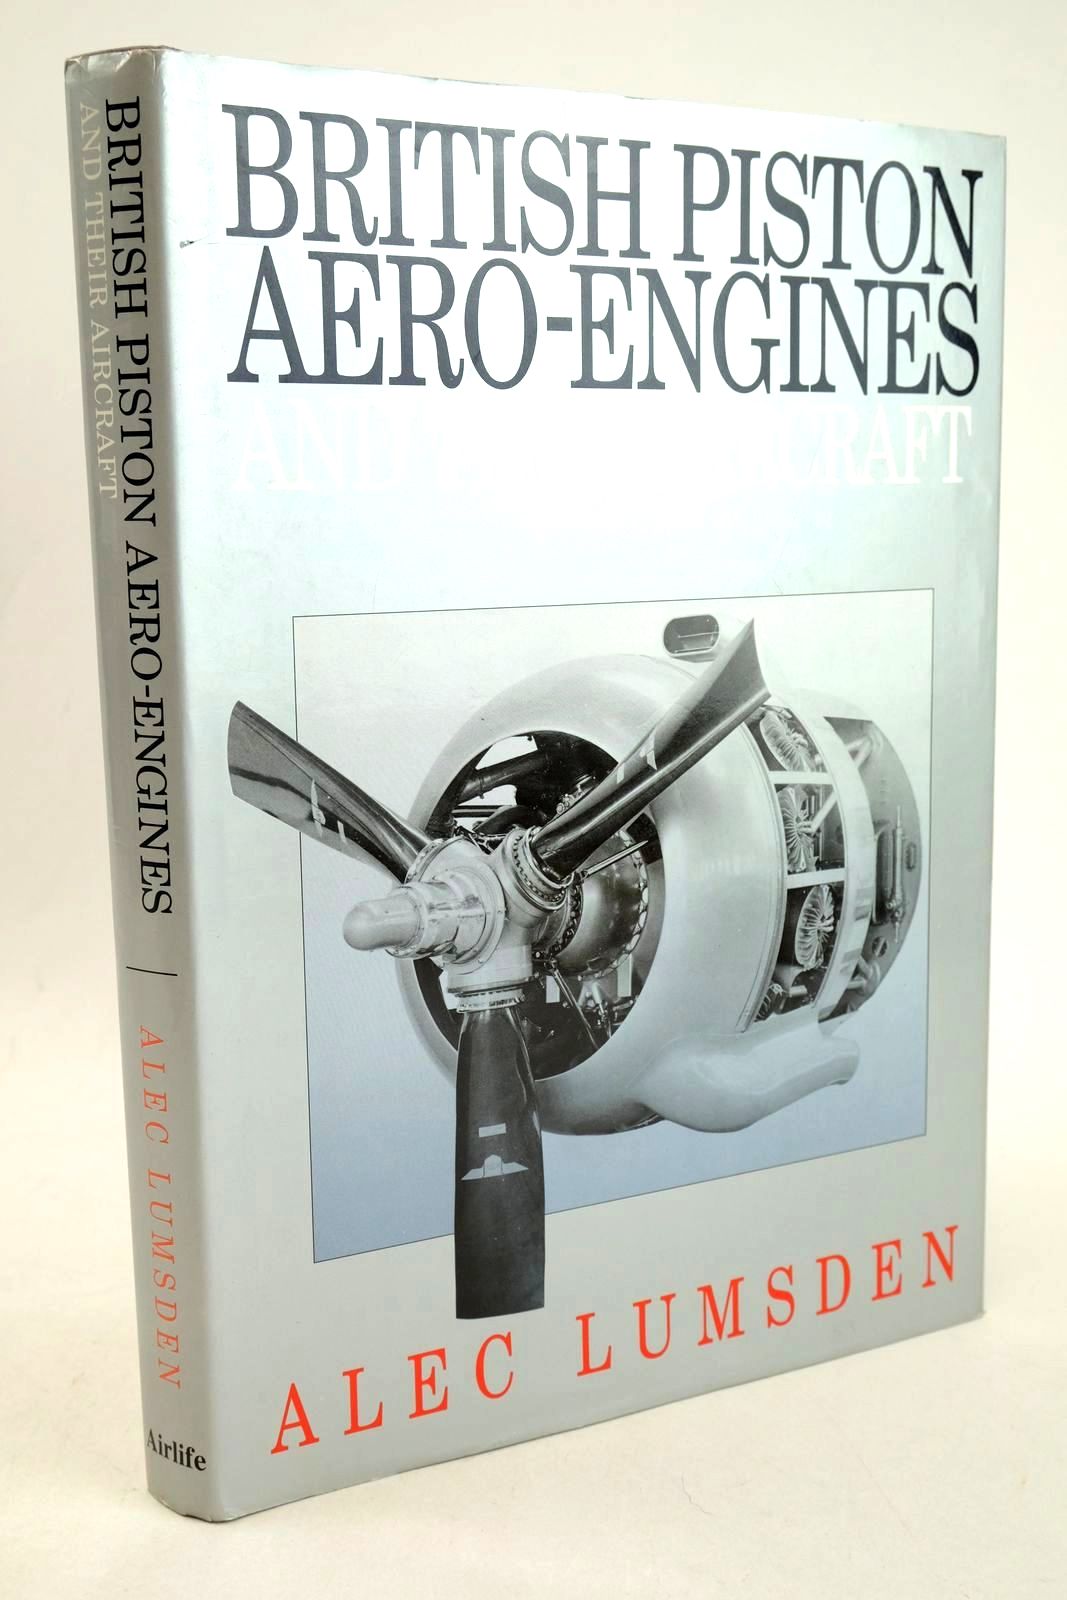 Photo of BRITISH PISTON AERO-ENGINES AND THEIR AIRCRAFT written by Lumsden, Alec published by Airlife (STOCK CODE: 1327982)  for sale by Stella & Rose's Books